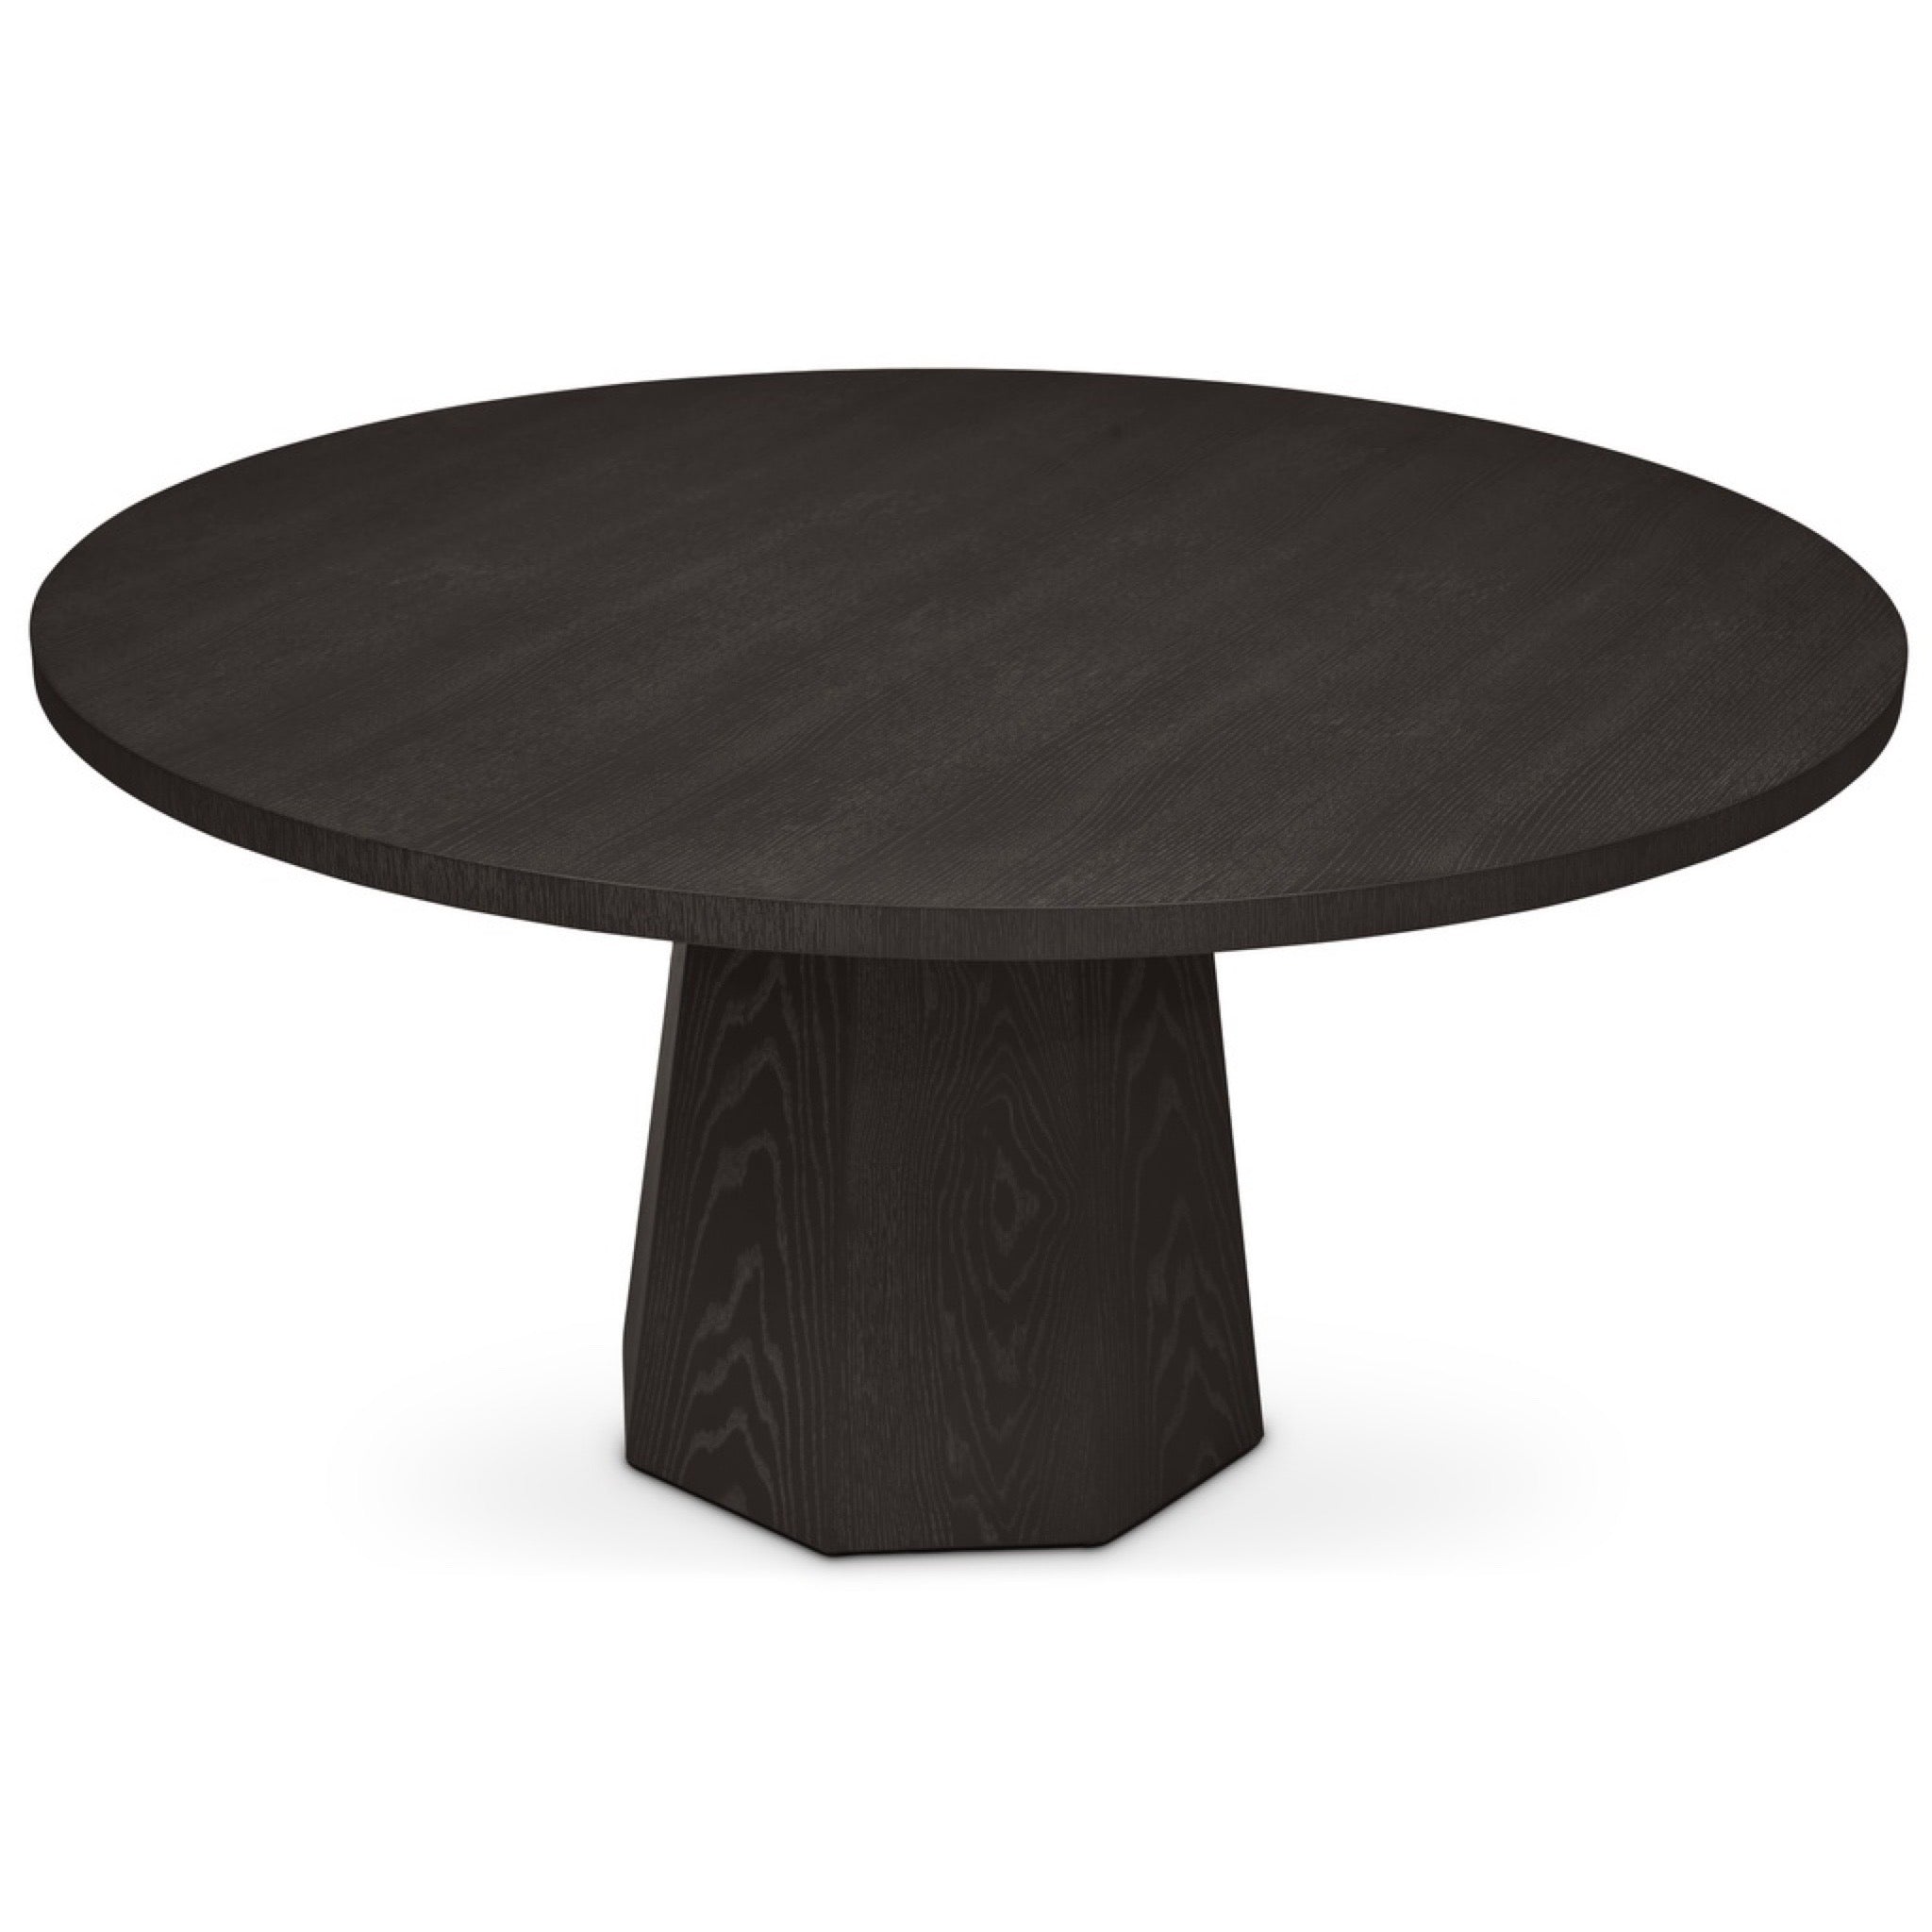 KAIA ROUND DINING TABLE - CHARCOAL